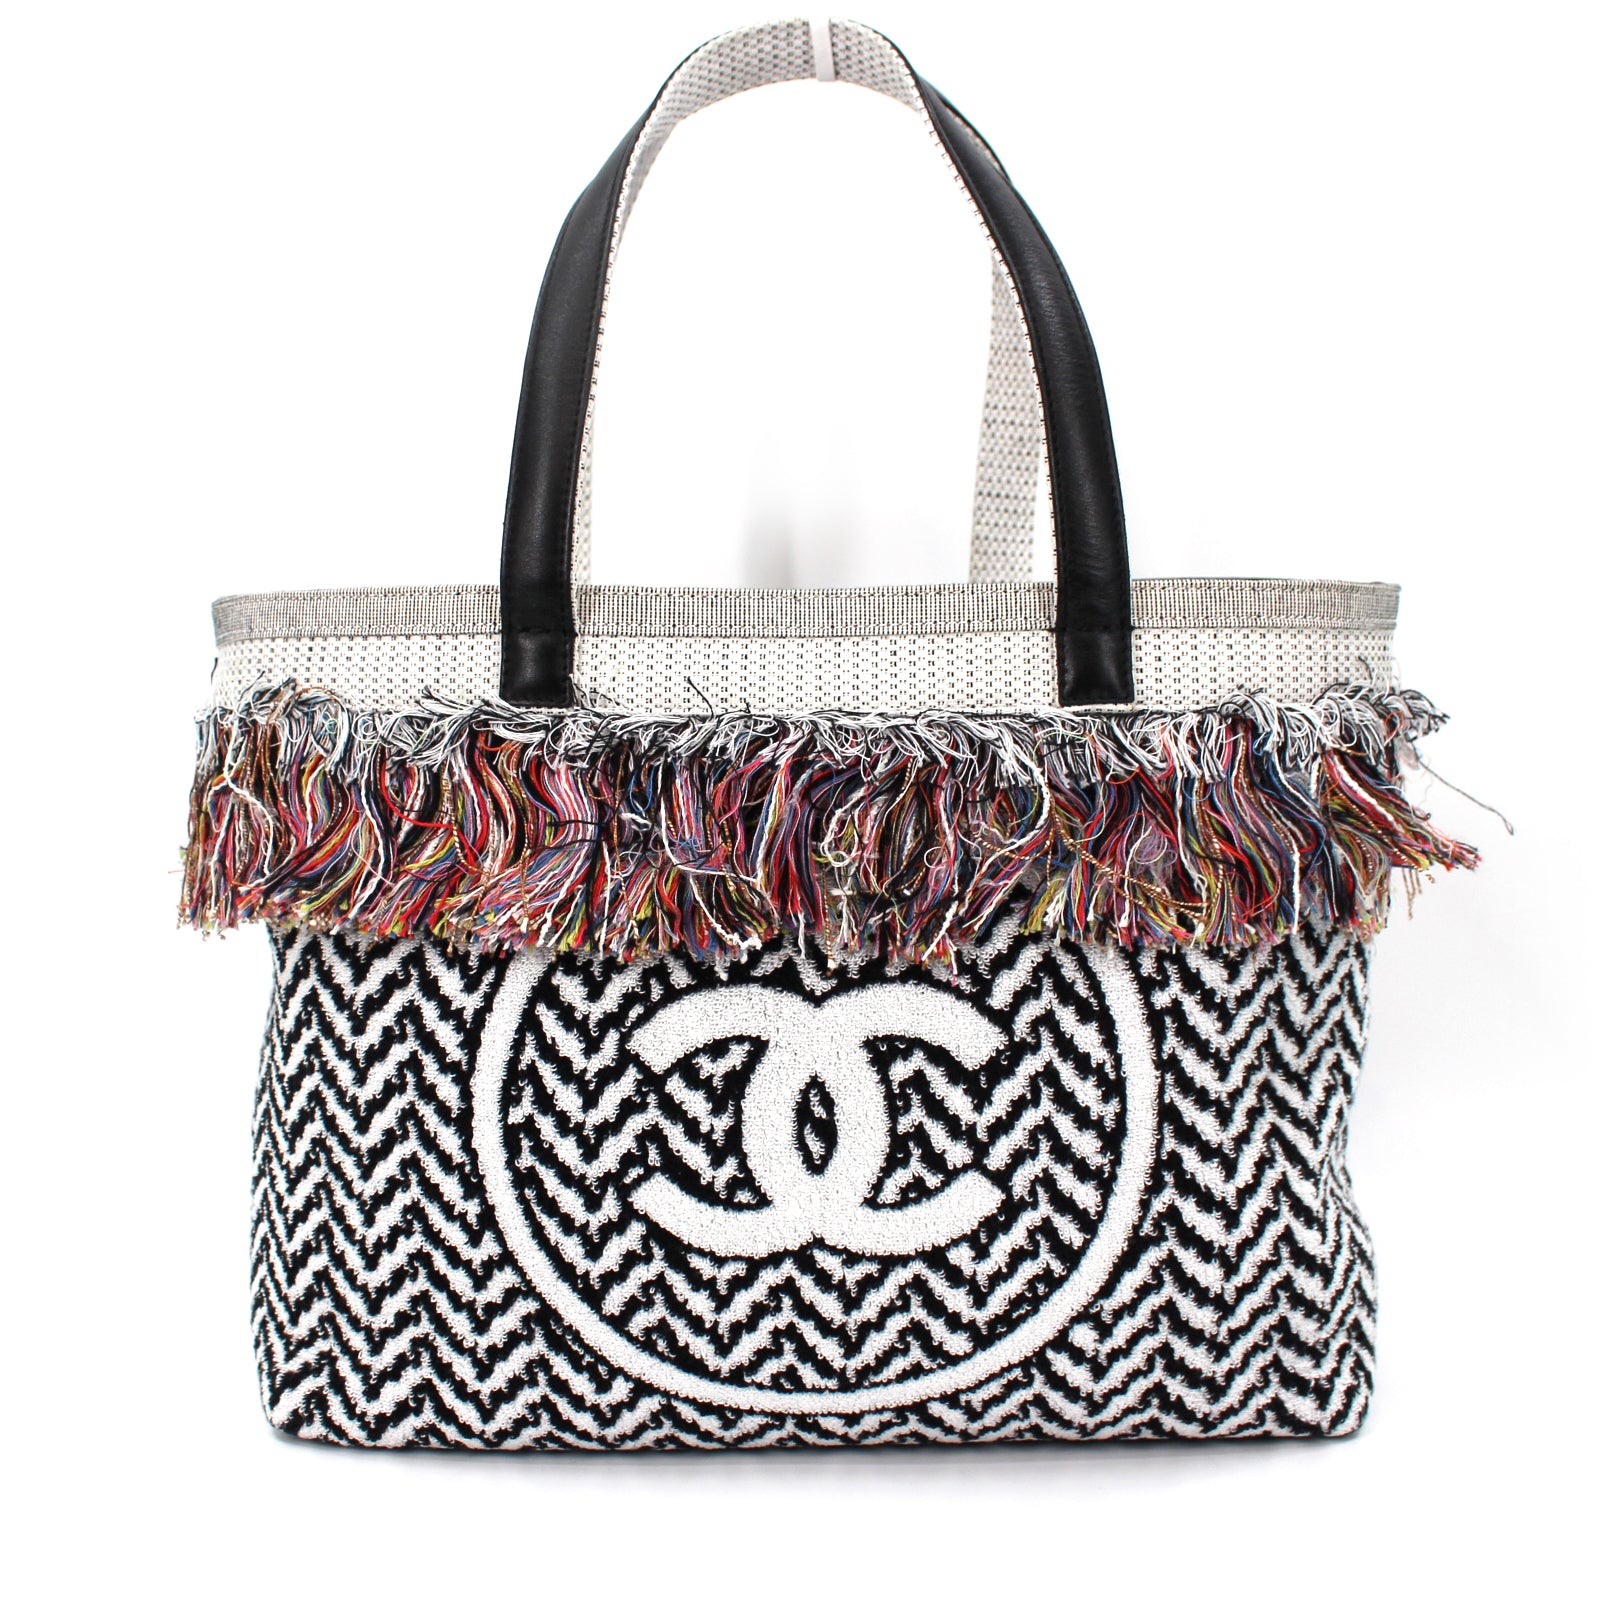 Chanel Makes the Most Luxurious Beach Bag and Towel Set Ever - PurseBlog